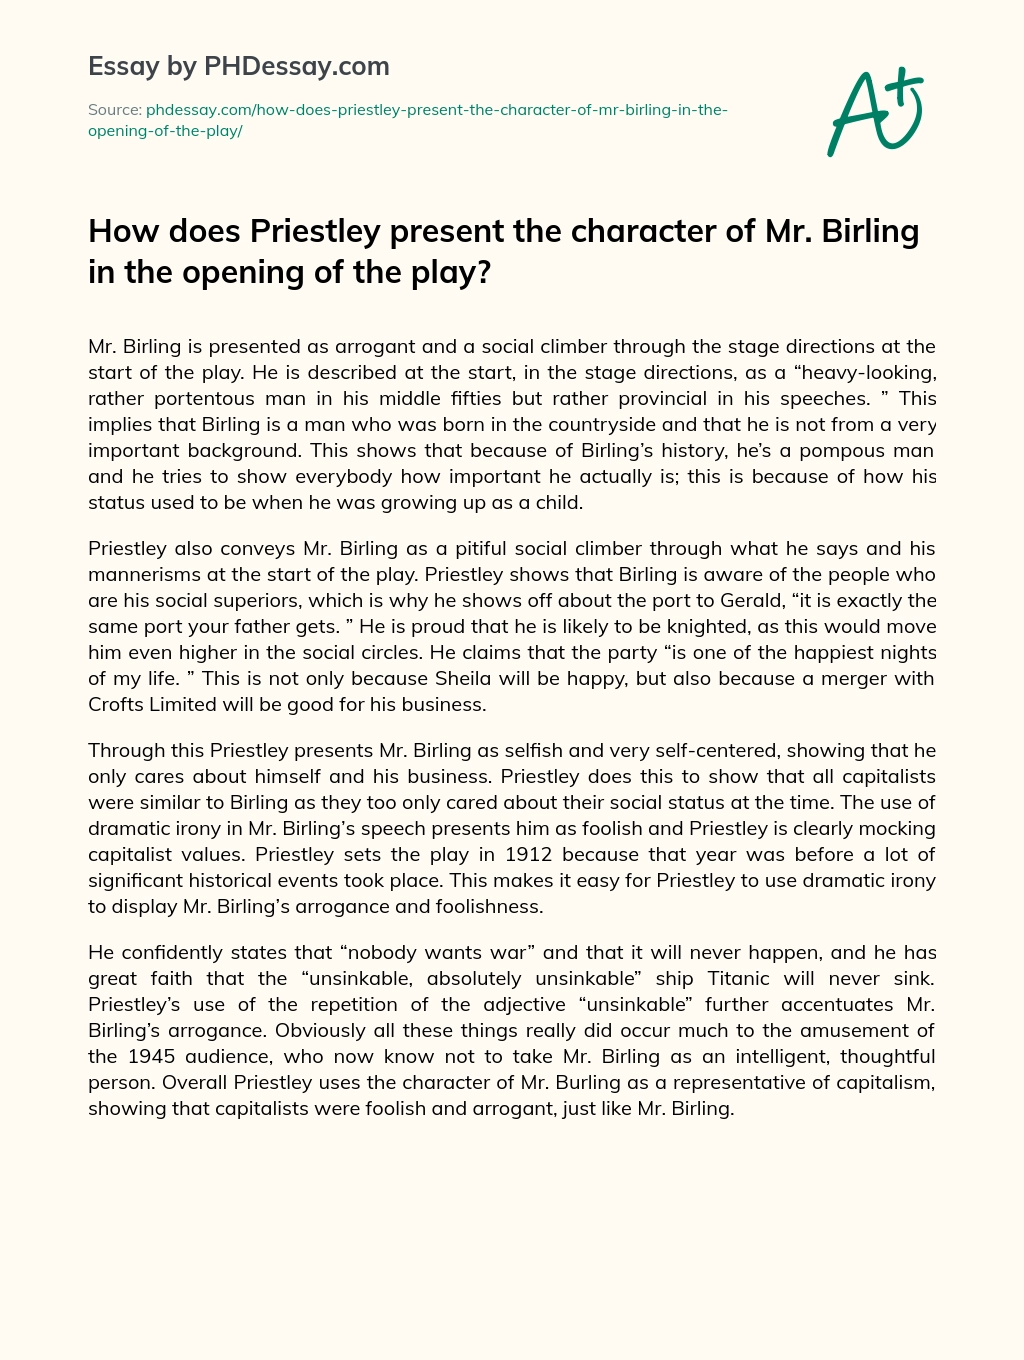 ﻿How does Priestley present the character of Mr. Birling in the opening of the play? essay